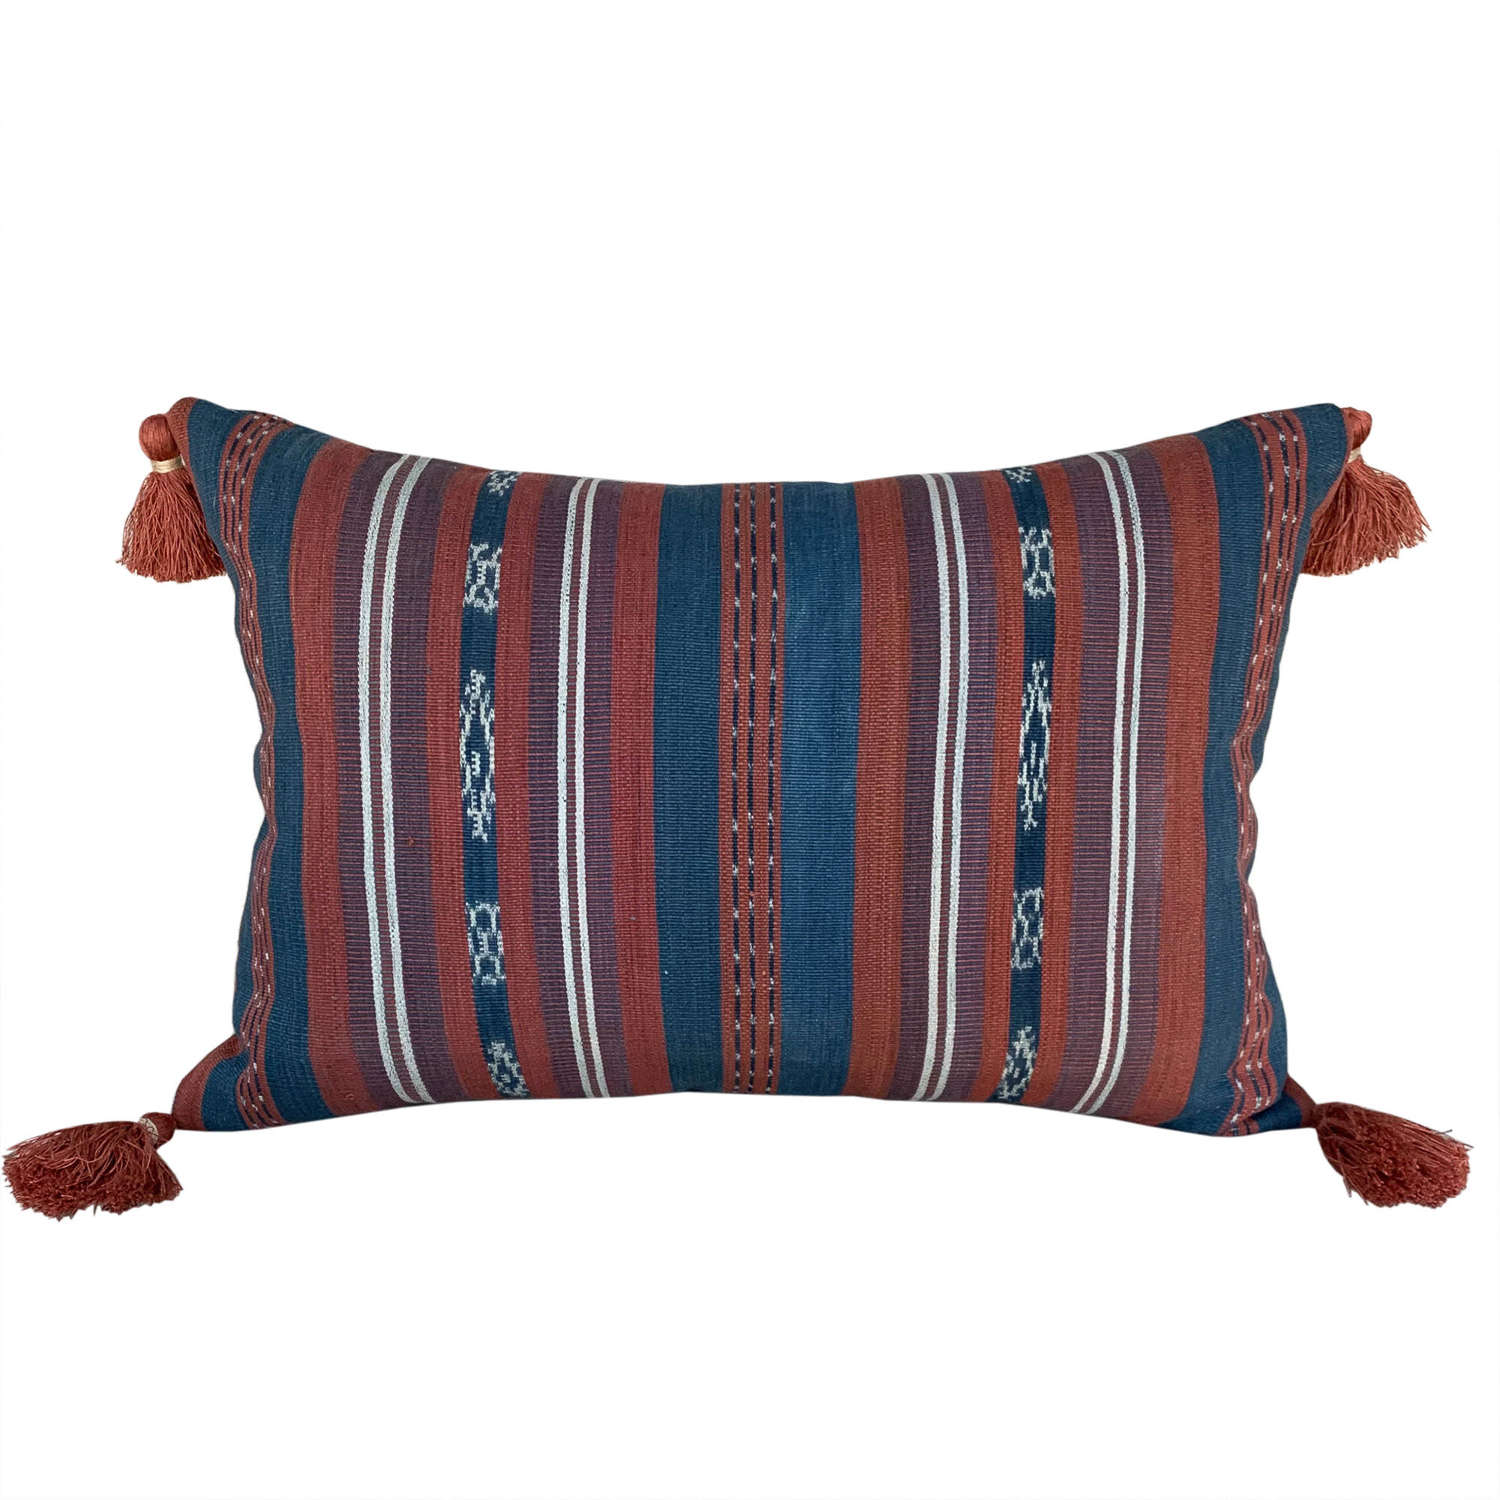 Flores Sikka cushions with rust tasssels